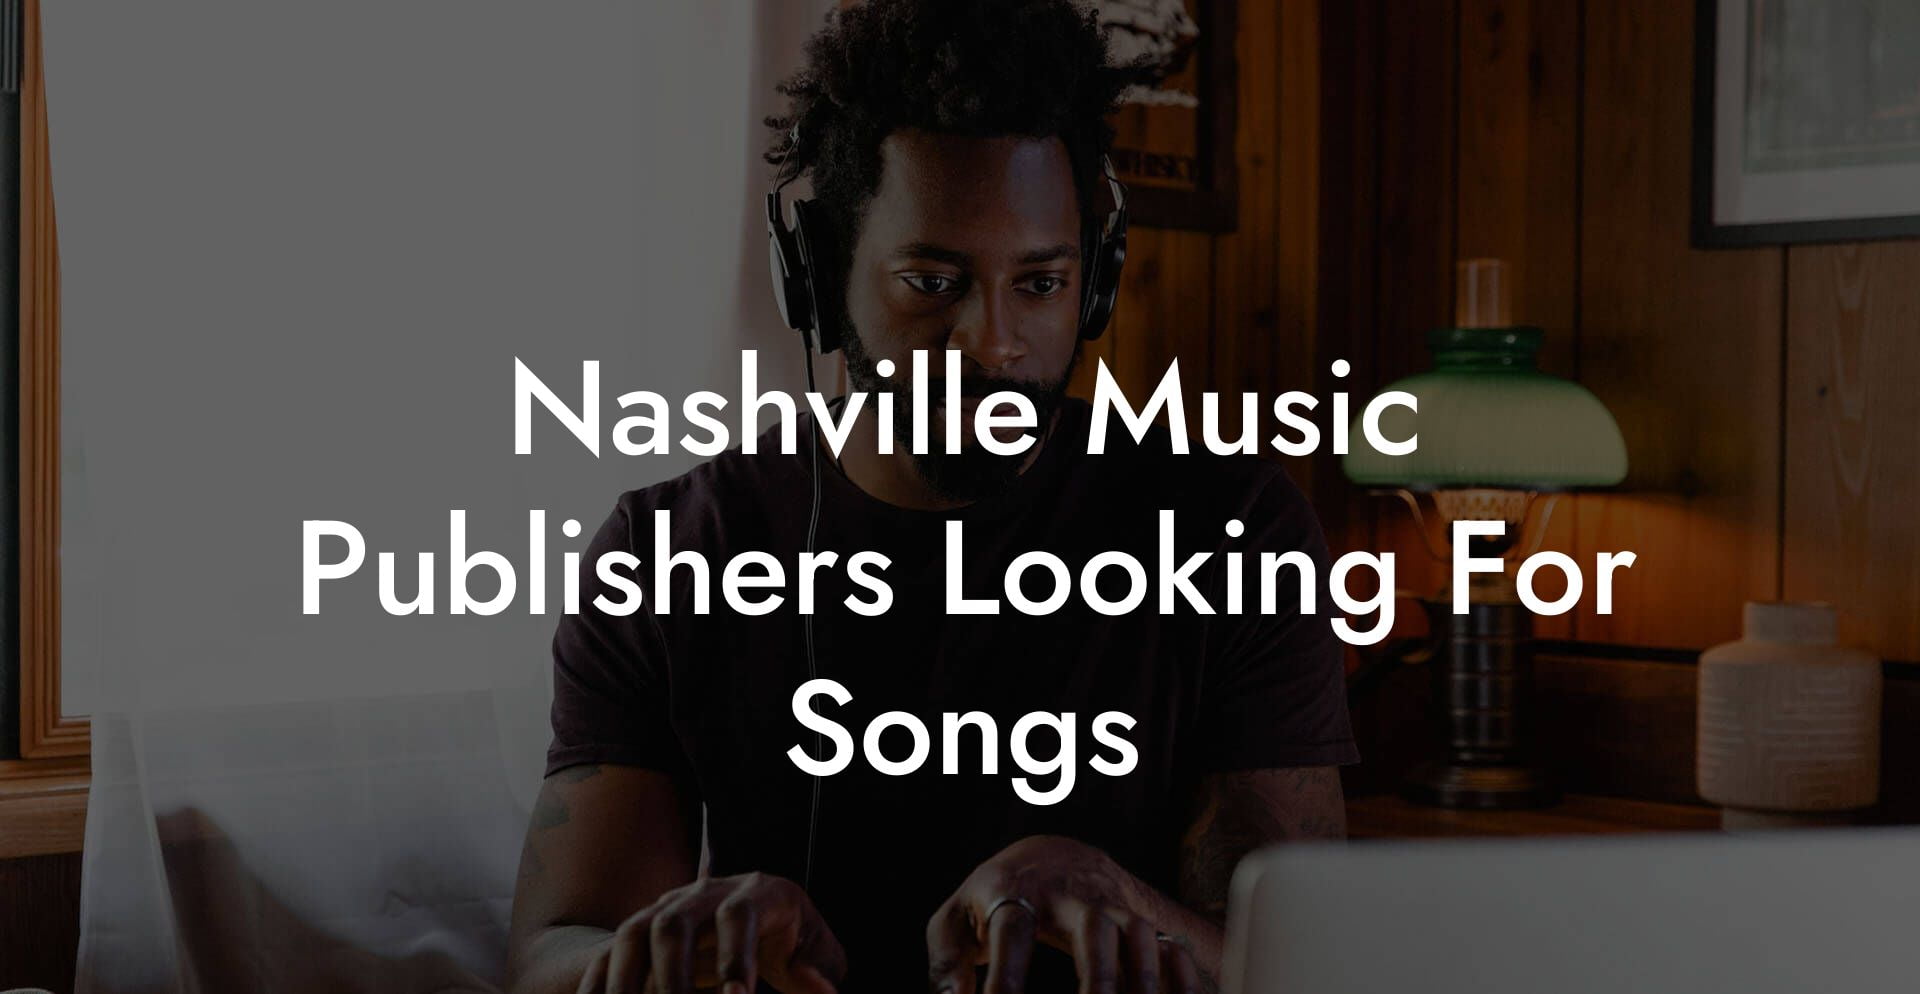 Nashville Music Publishers Looking For Songs